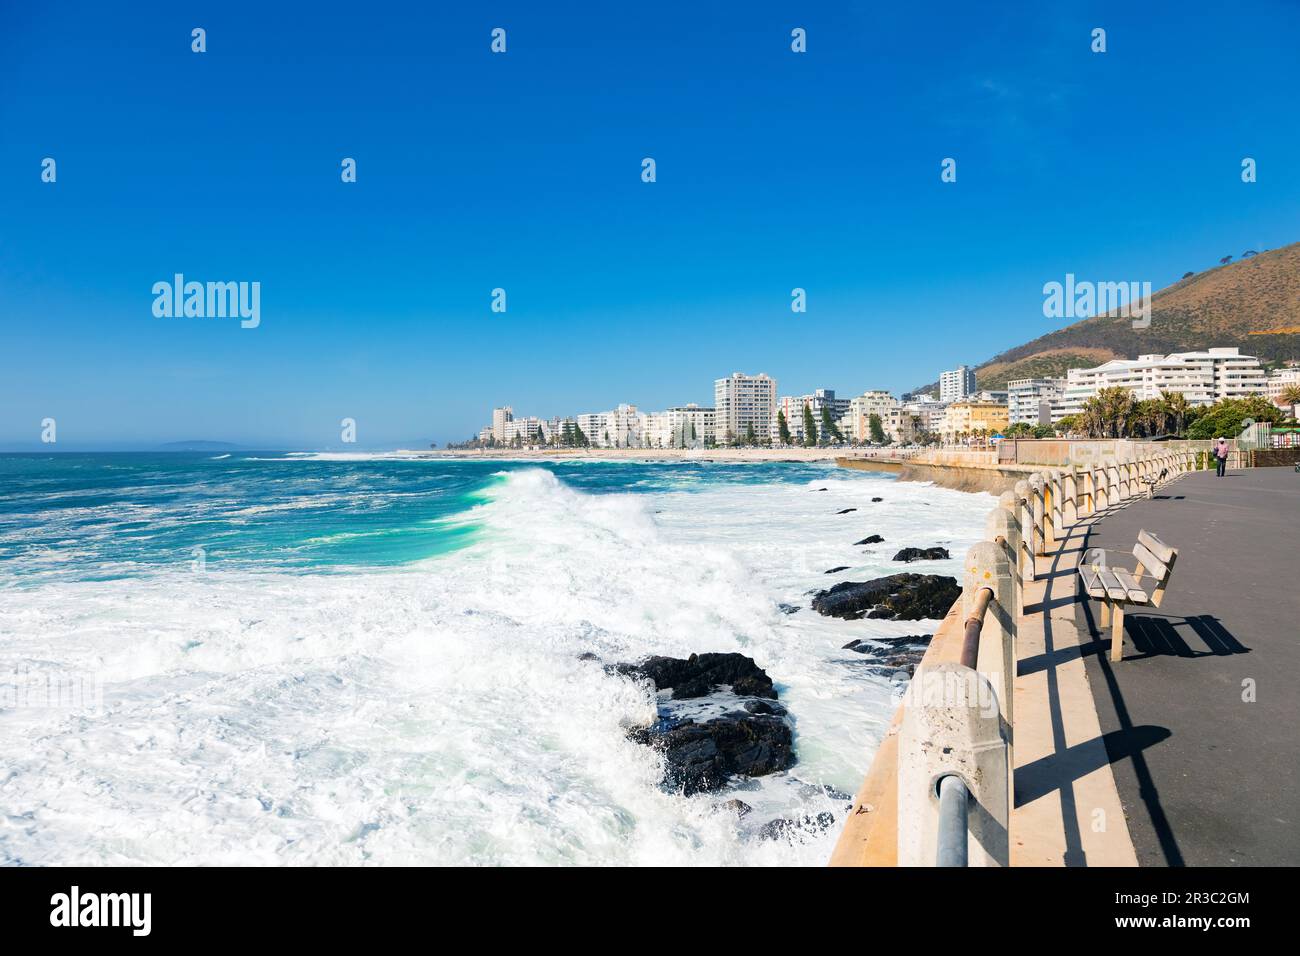 View of Sea Point promenade on the Atlantic Seaboard of Cape Town South Africa Stock Photo